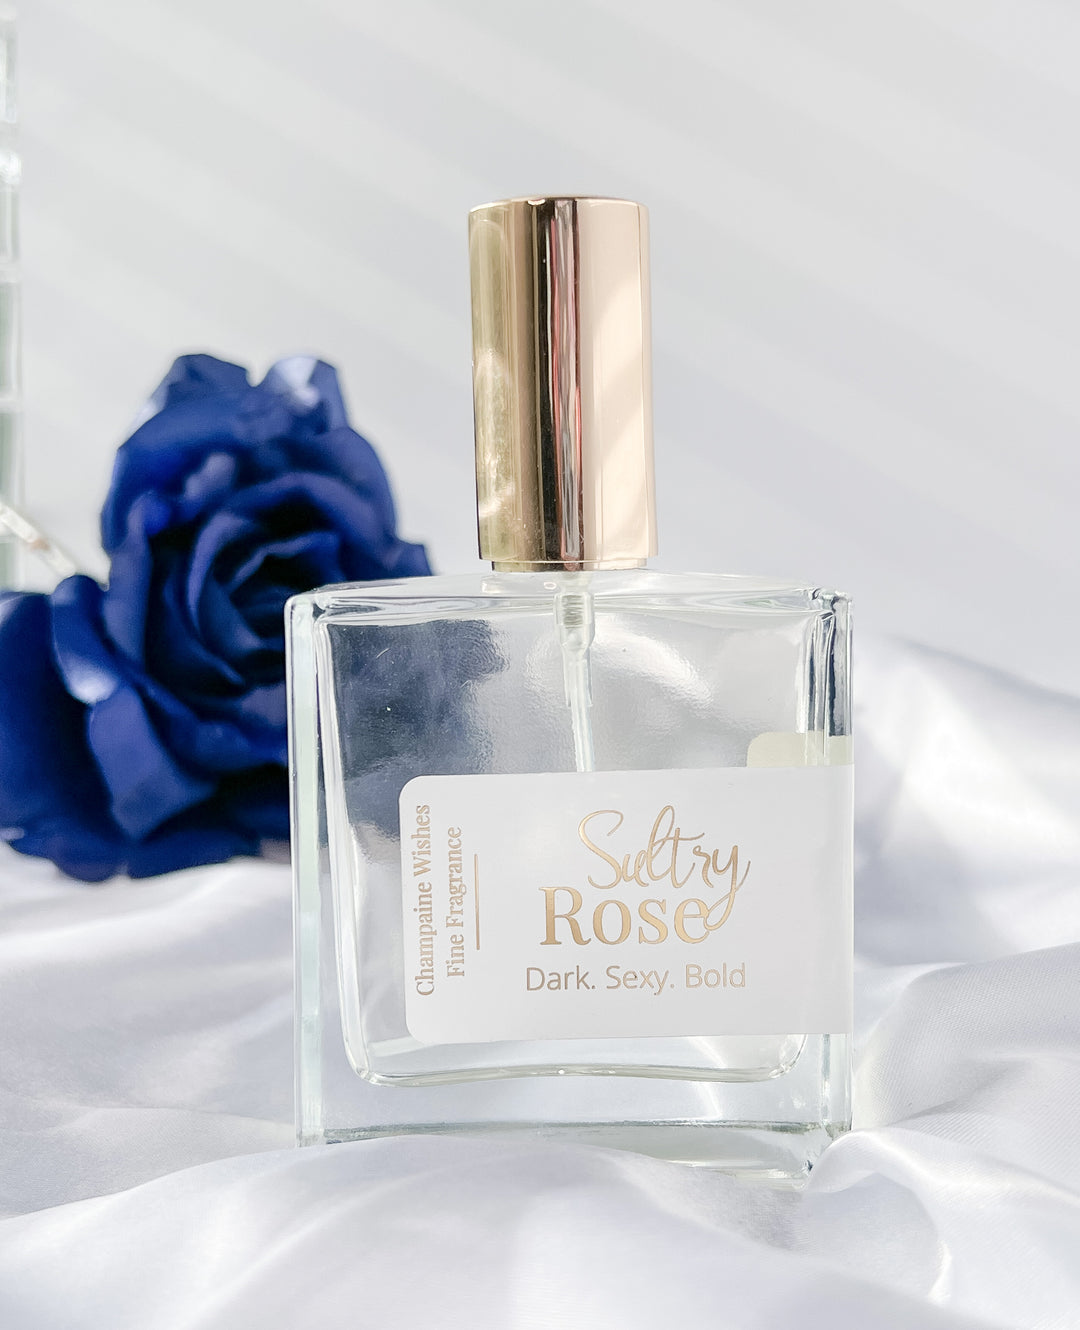 Sultry Rose Luxury Room Spray